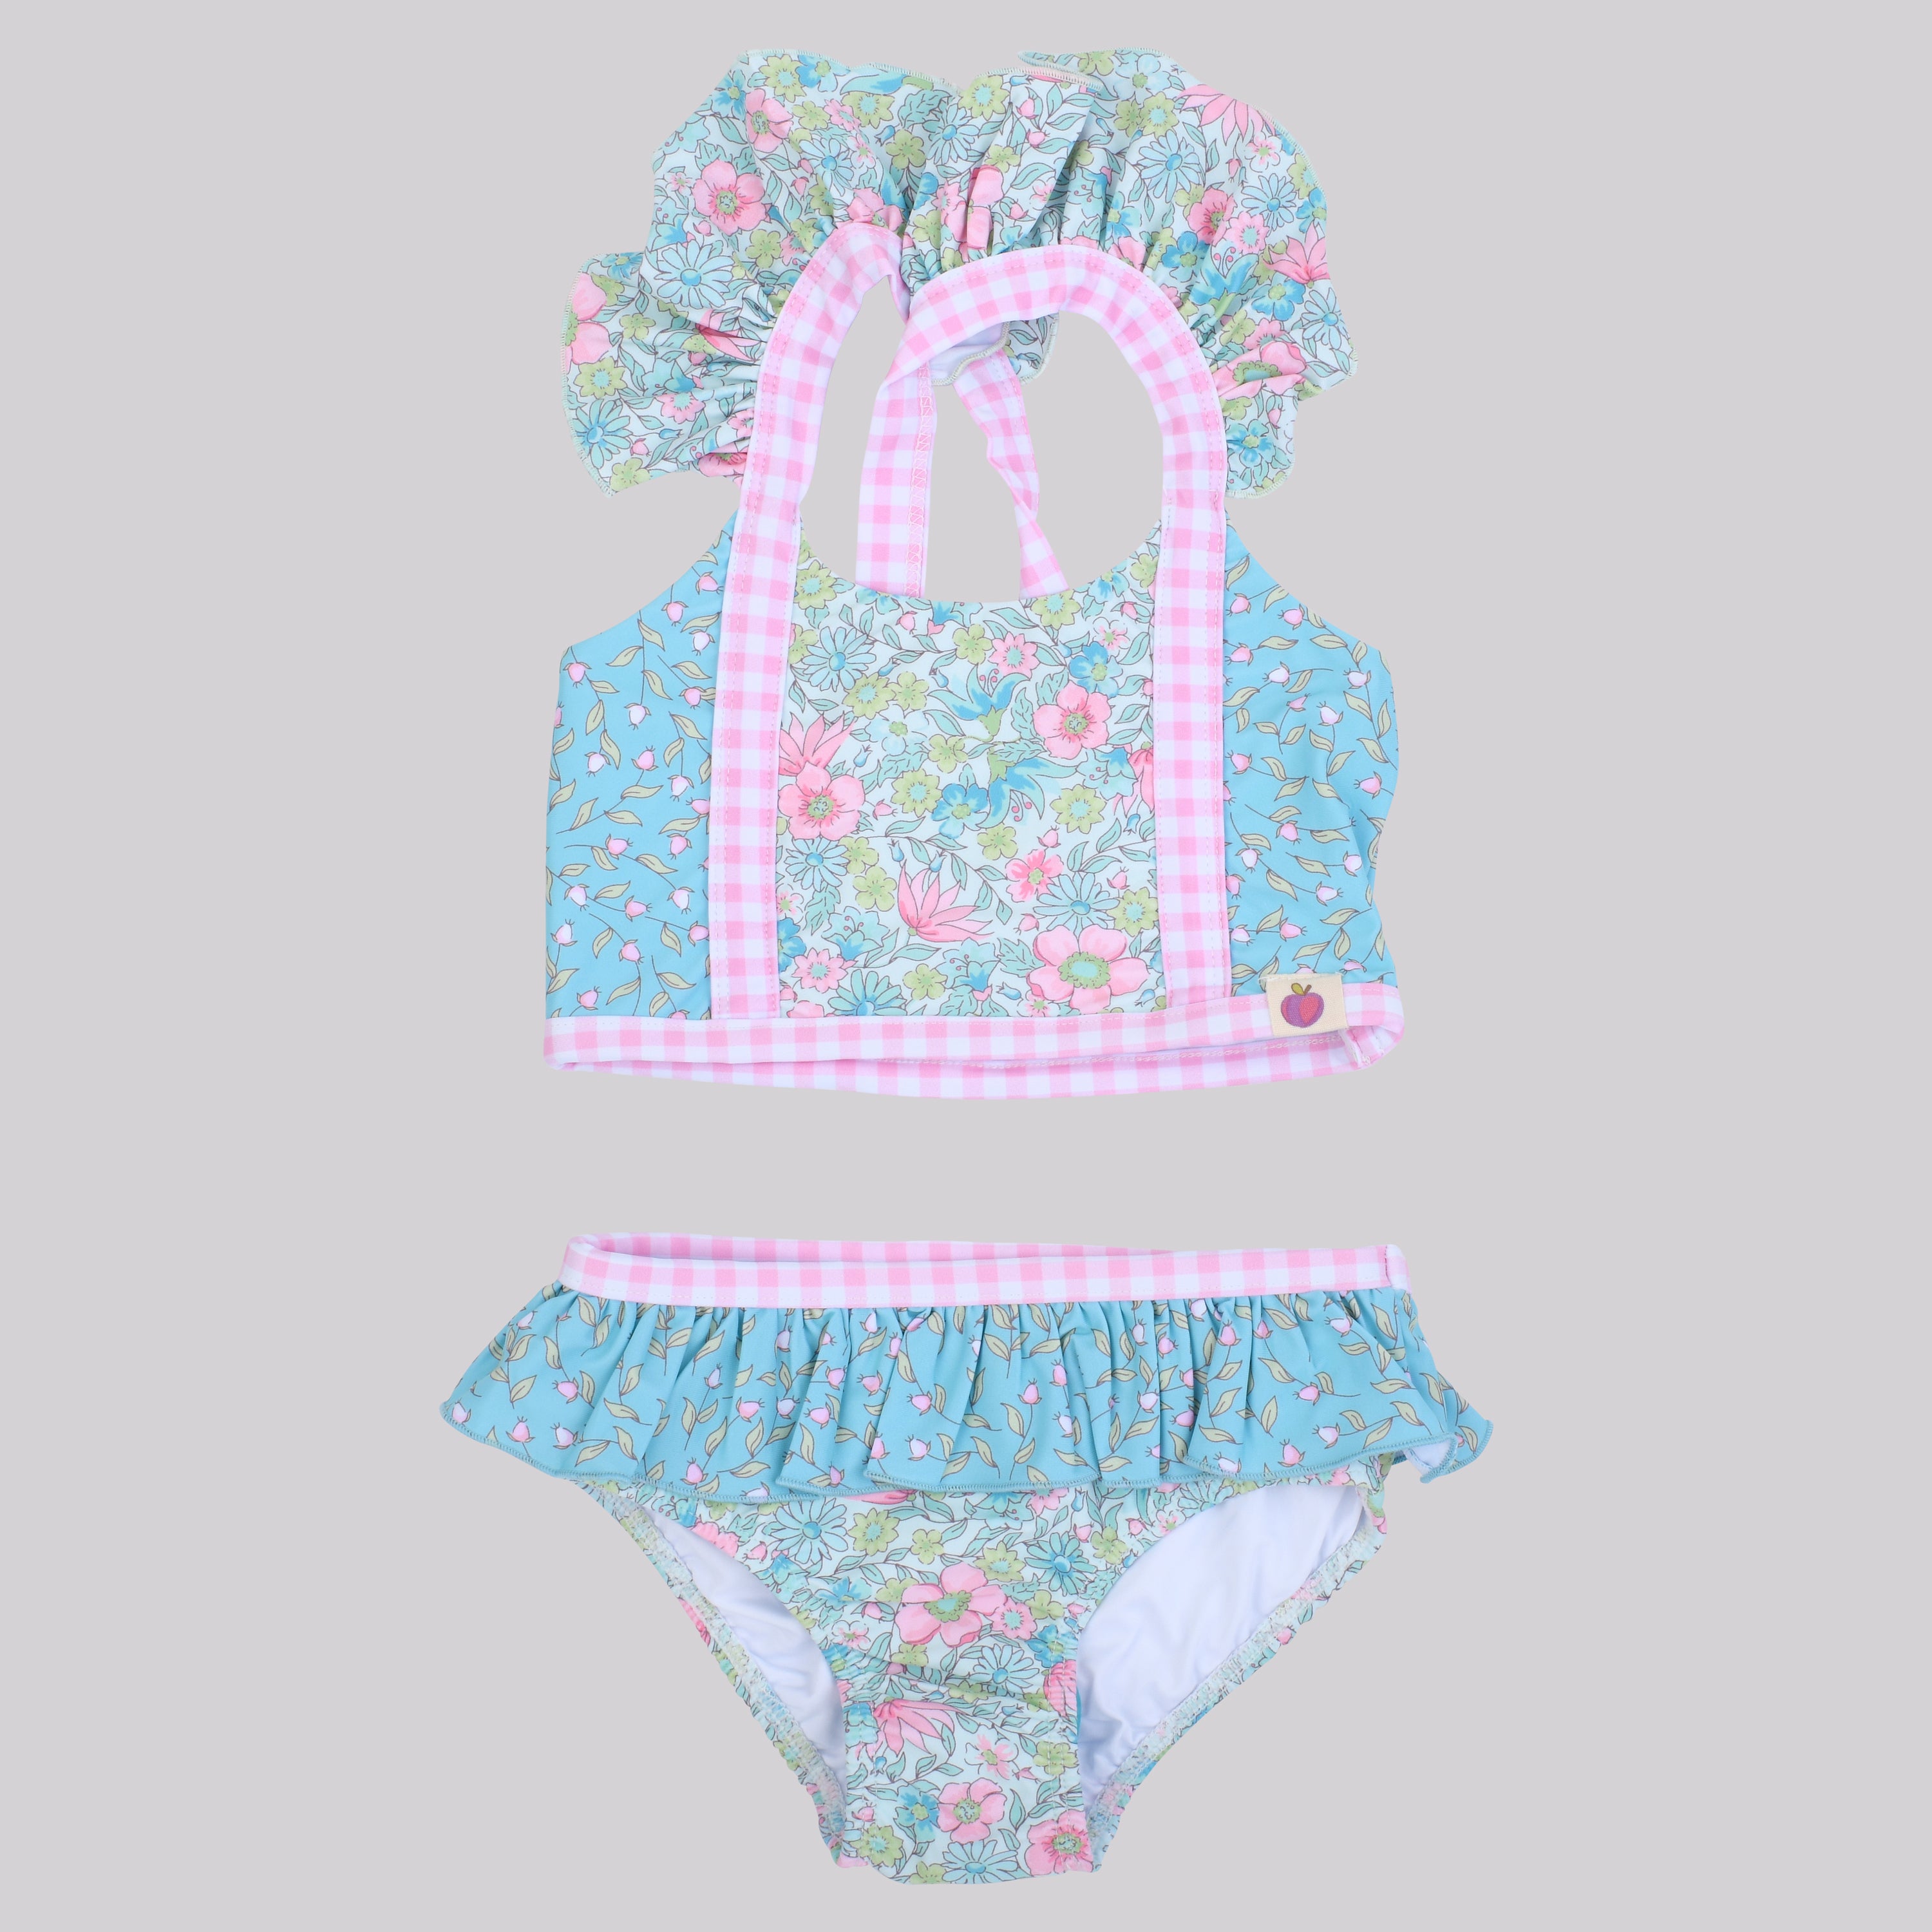 Nora Swimsuit - Rose Water Blossom